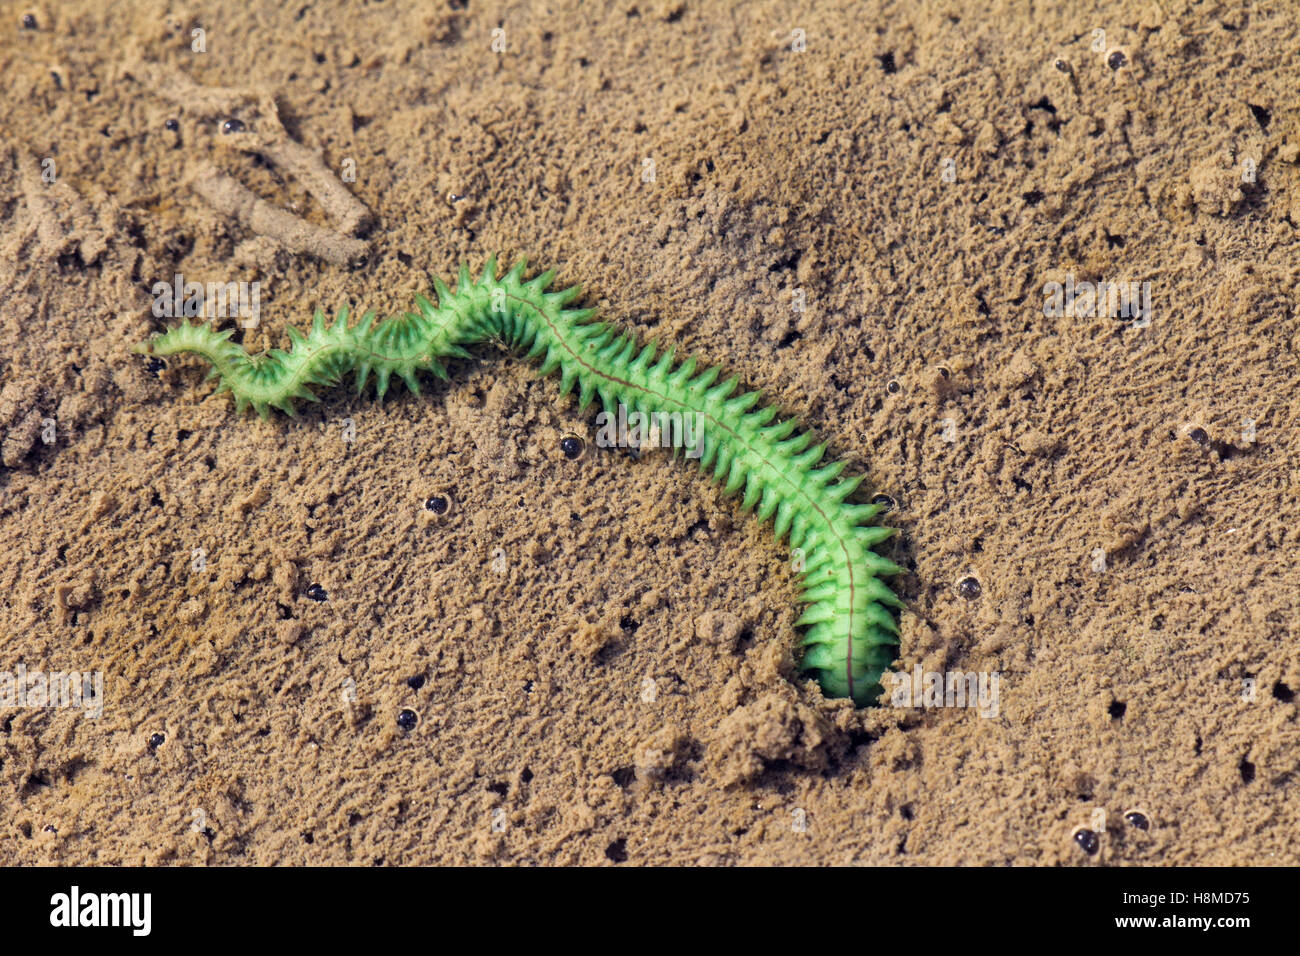 Common Ragworm (Nereis diversicolor). Male has changedits colour from black to green in breeding season. Germany Stock Photo